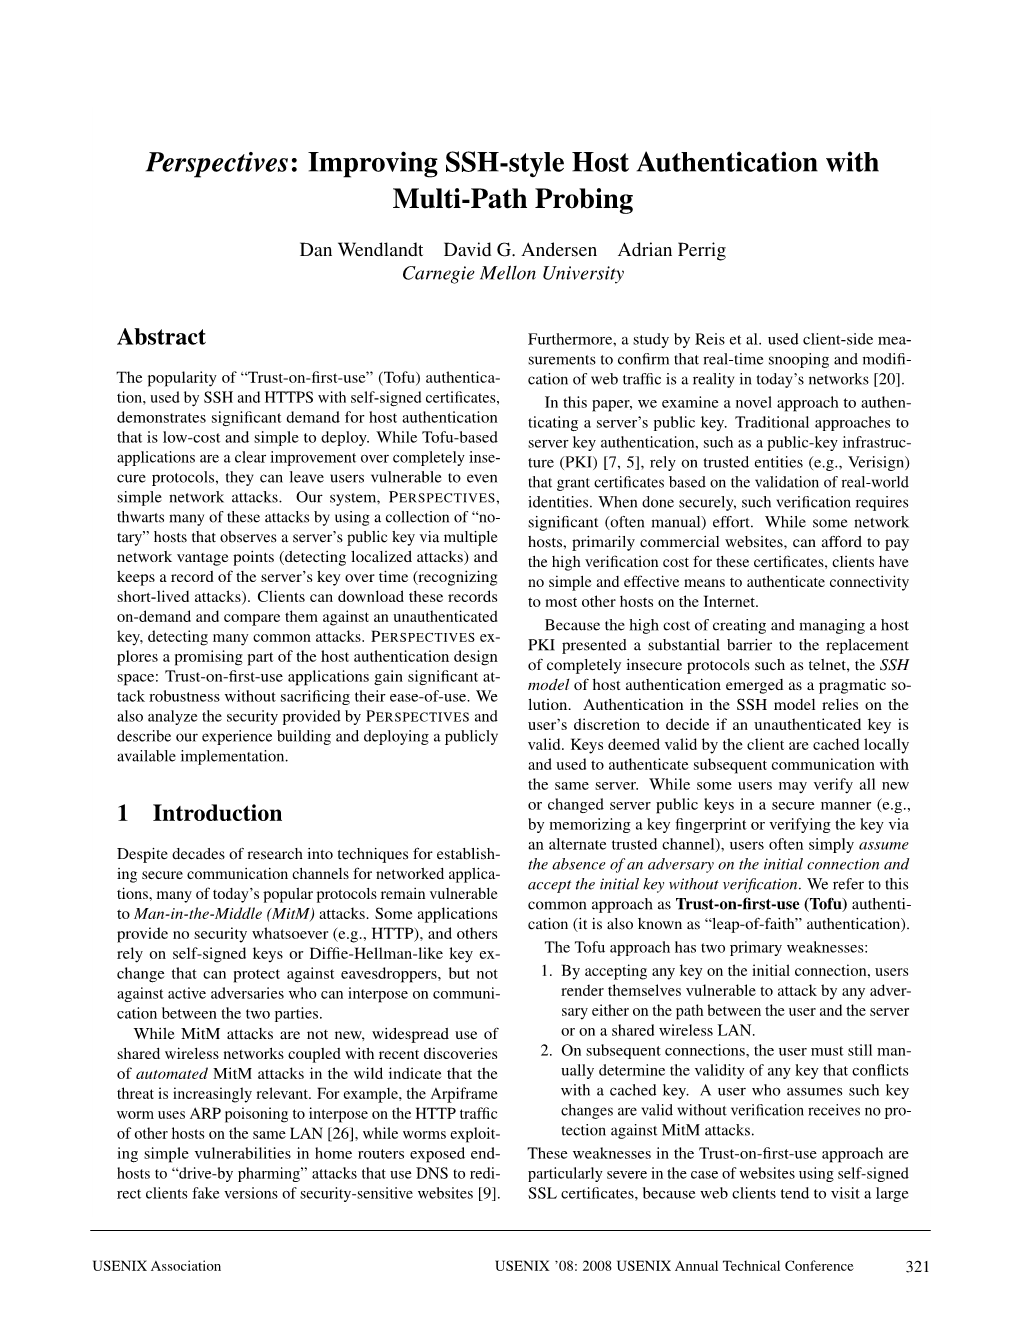 Perspectives: Improving SSH-Style Host Authentication with Multi-Path Probing